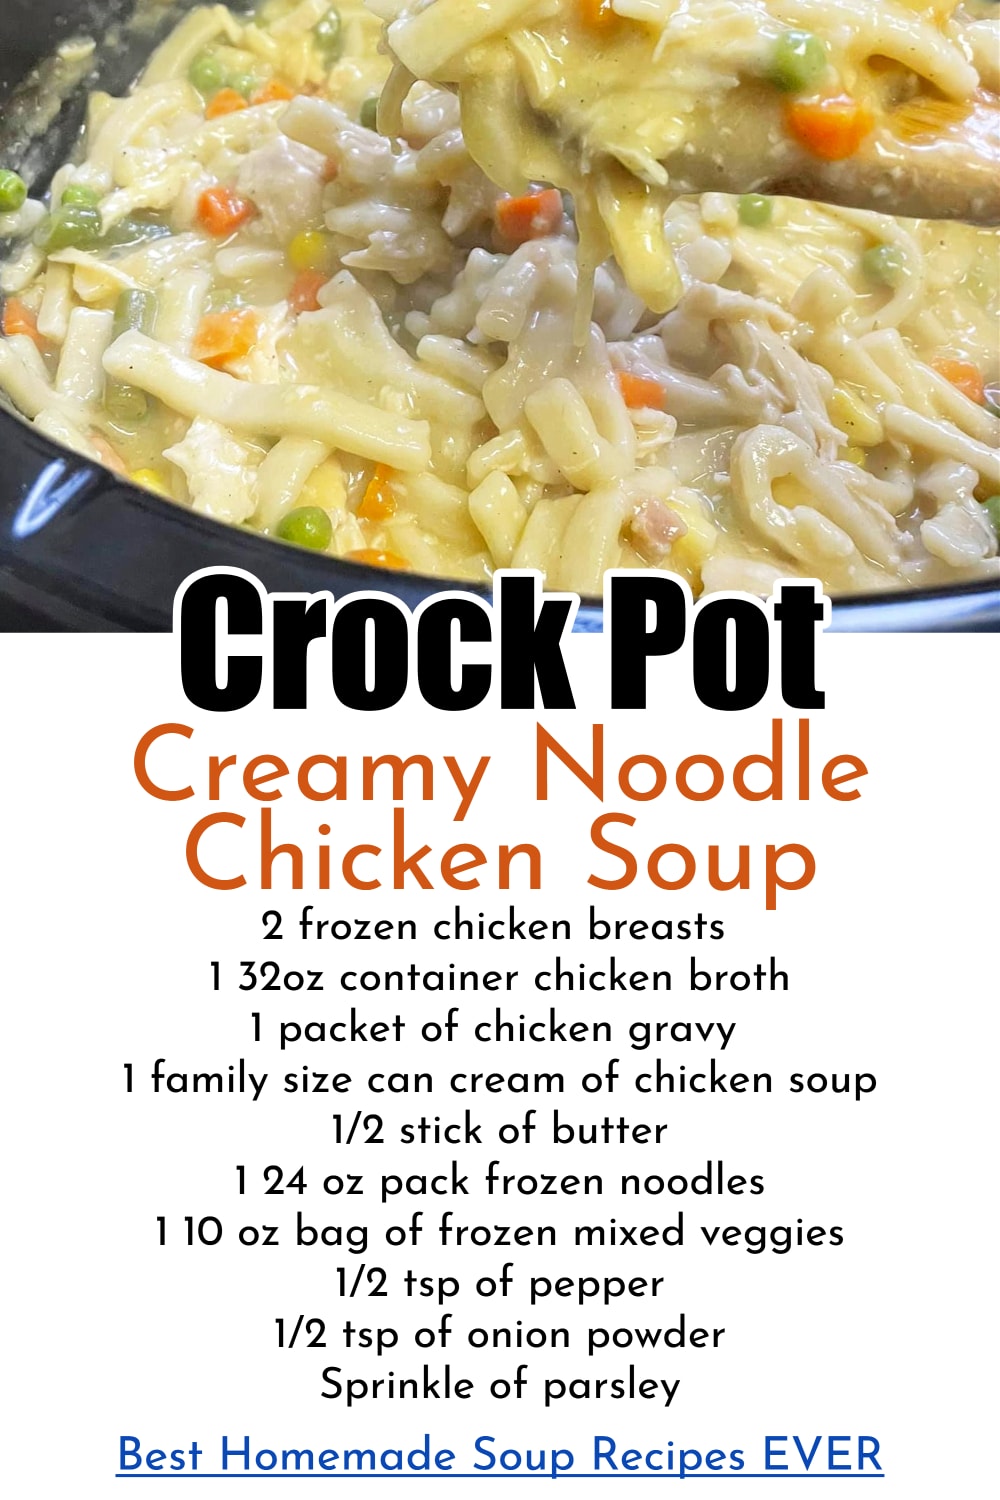 Homeade soup recipes - crock pot creamy chicken noodle soup with frozen chicken breasts and frozen noodles made in your slow cooker - best homemade soup recipes EVER